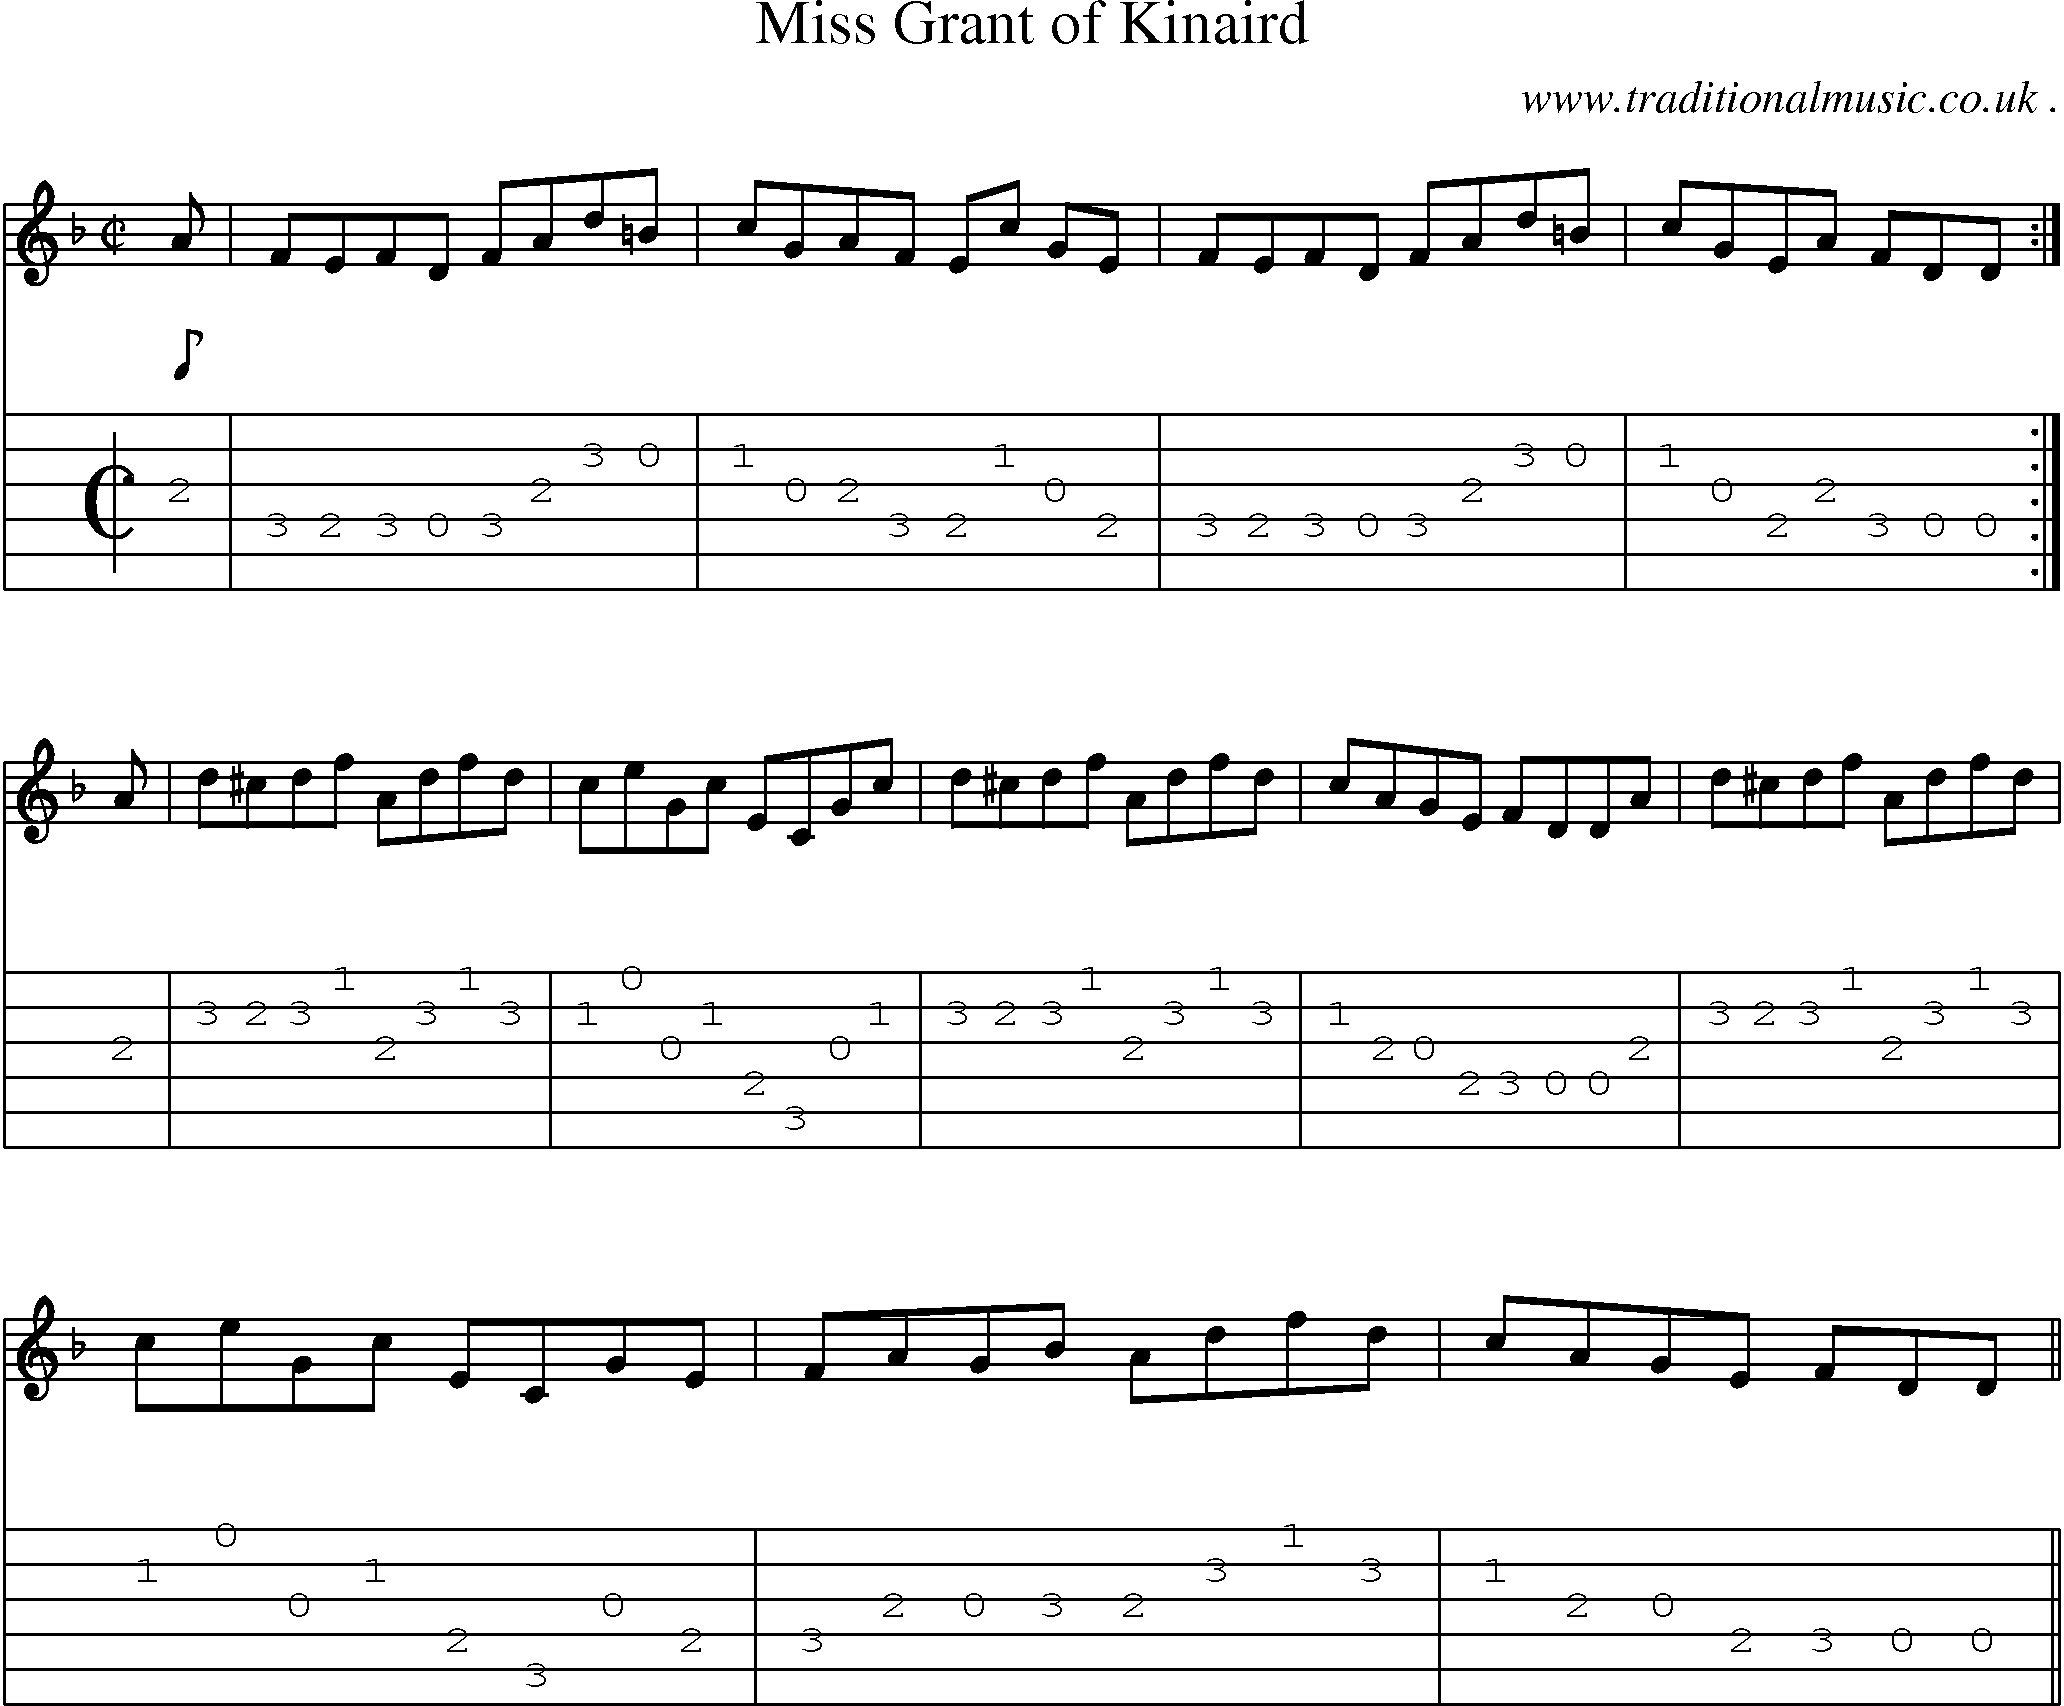 Sheet-music  score, Chords and Guitar Tabs for Miss Grant Of Kinaird